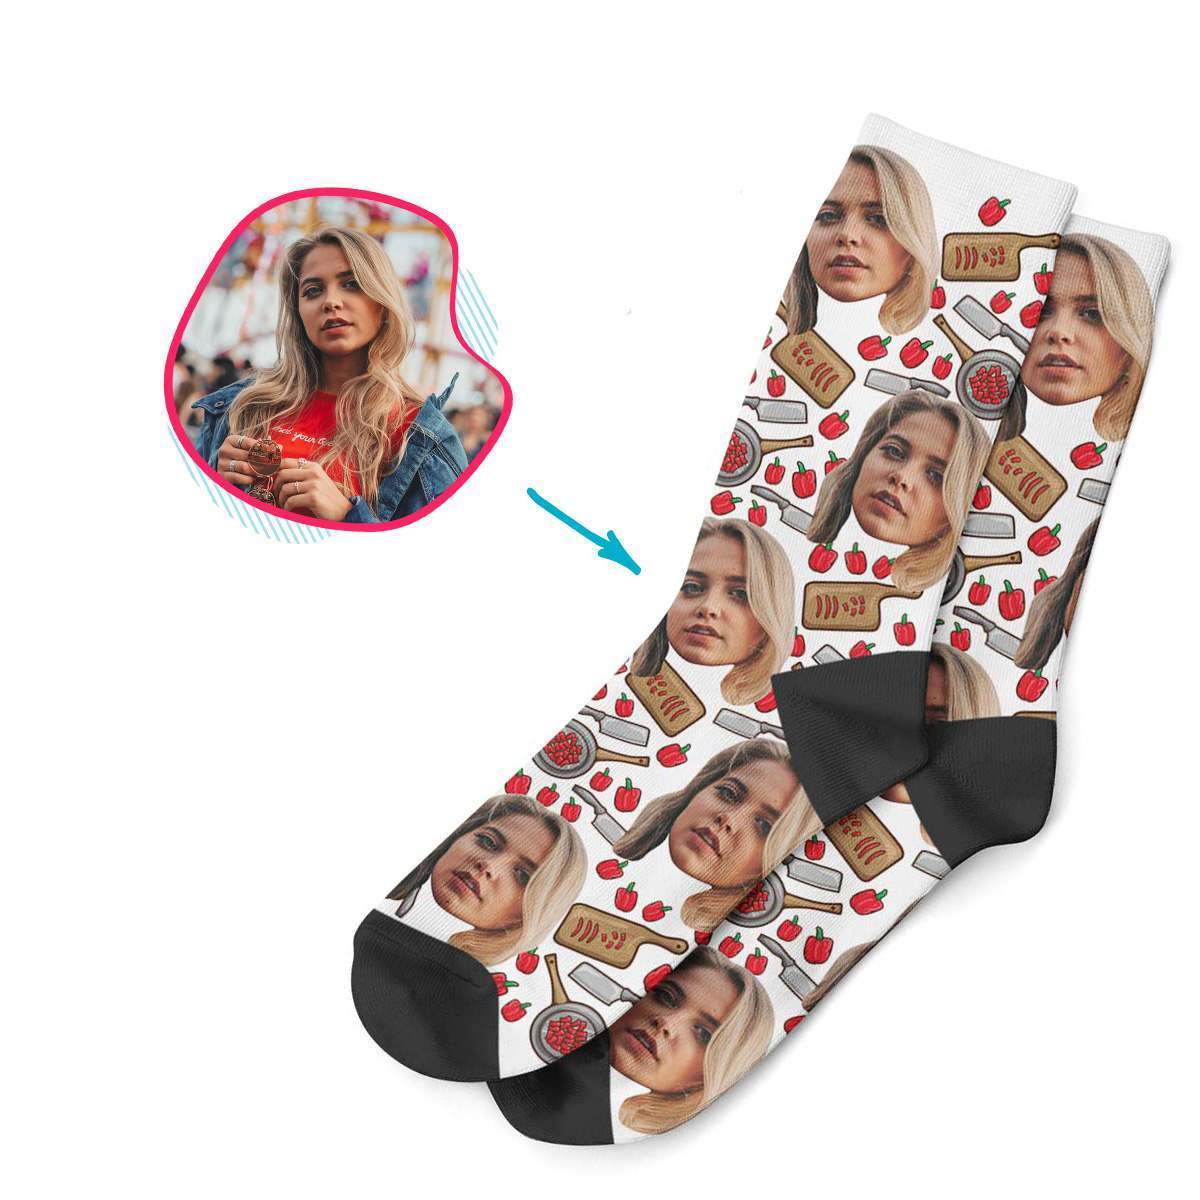 white Сooking socks personalized with photo of face printed on them